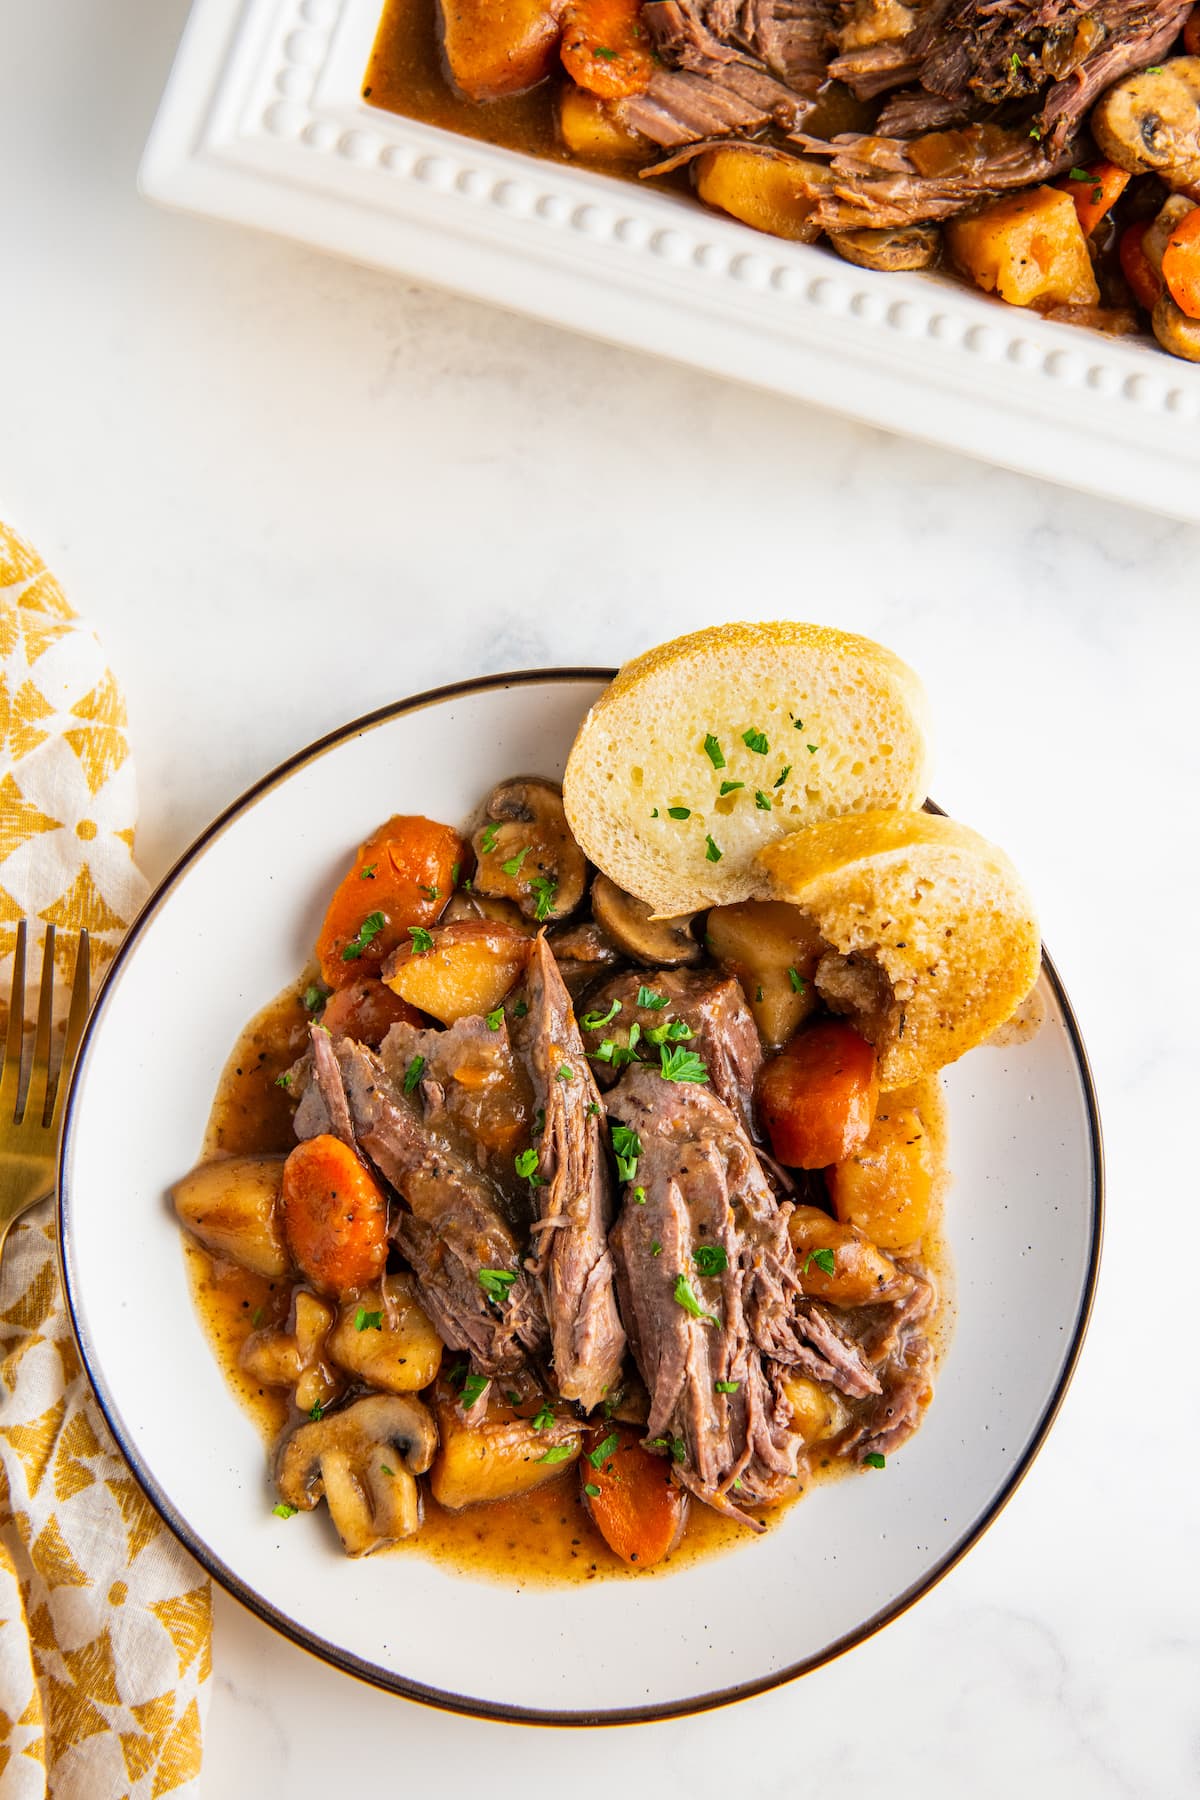 A plate of shredded pot roast, veggies, and bread.